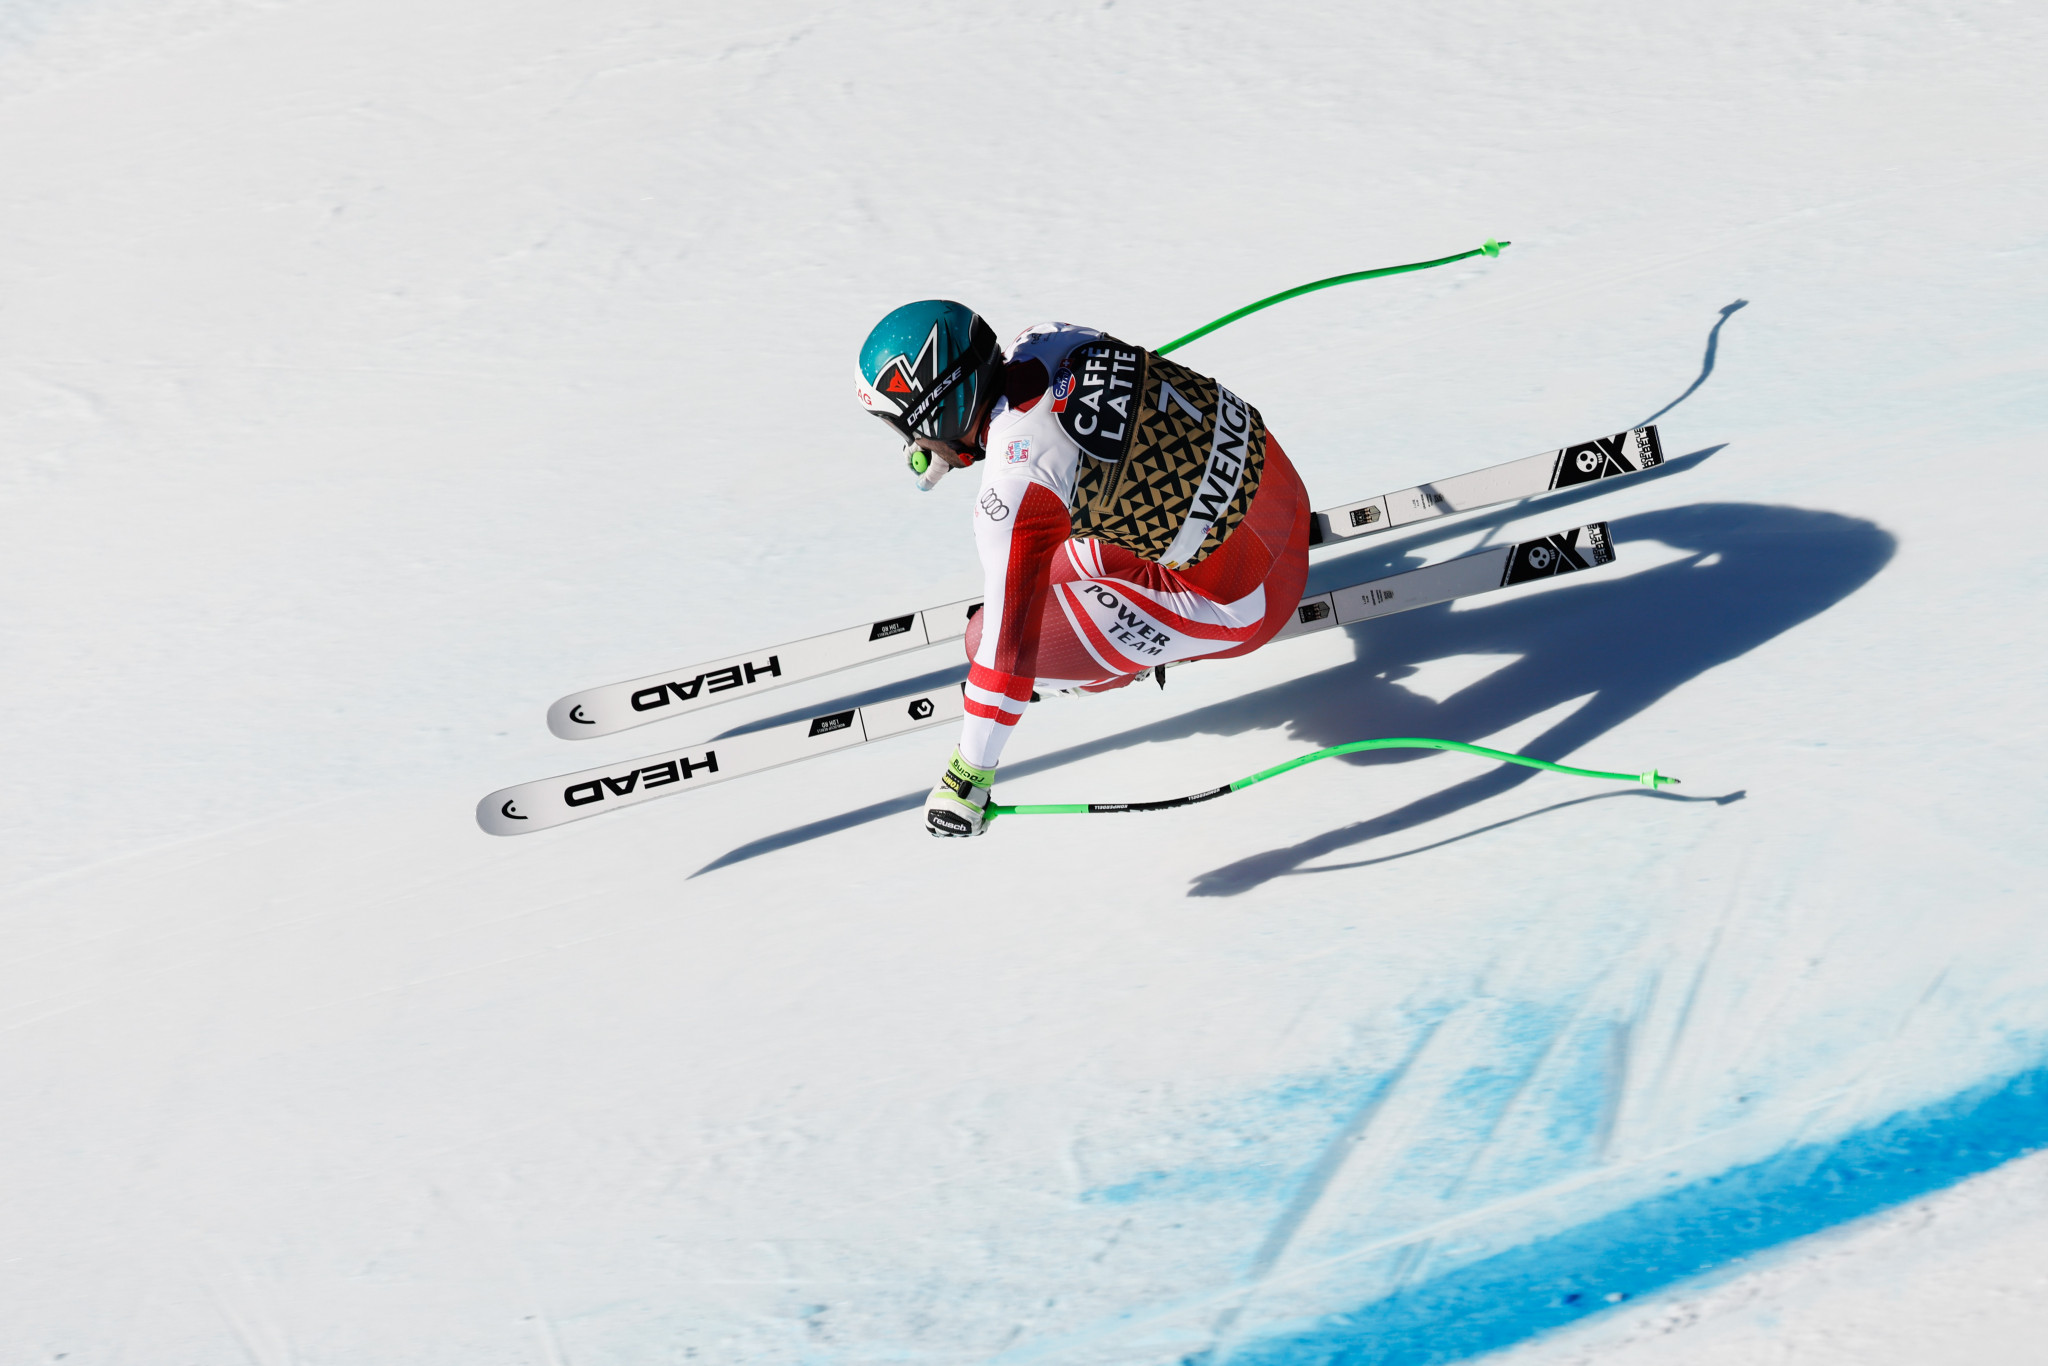 Vincent Kriechmayr missed training in Wengen but was sill allowed to take part in the downhill races ©Getty Images